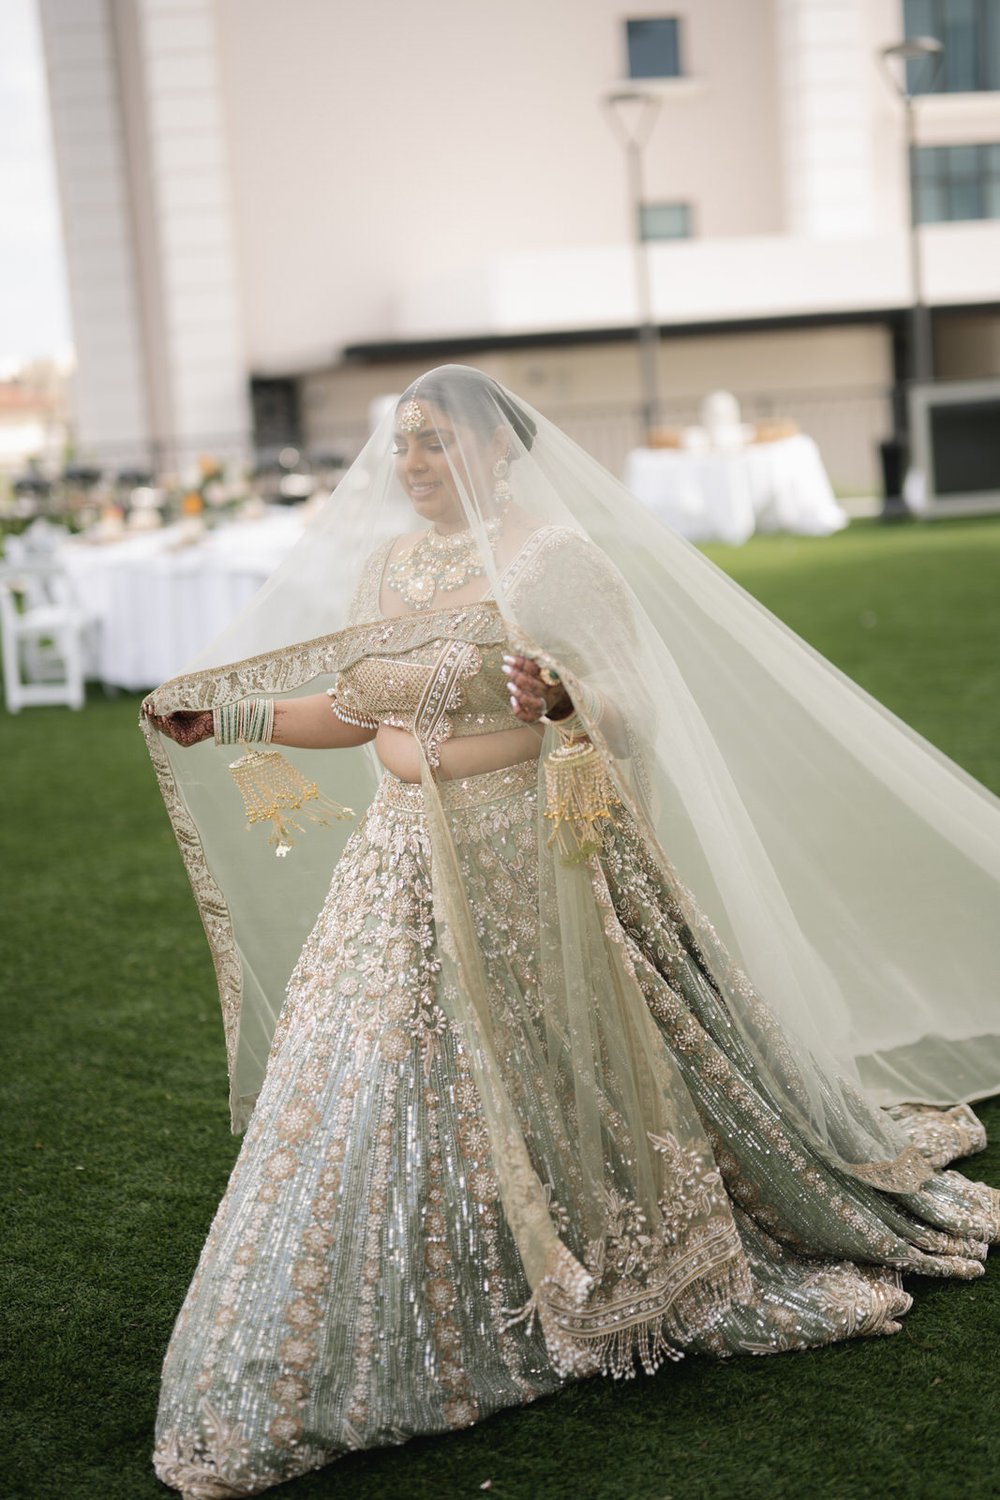 Luxury Indian Wedding in Miami Florida - Indian wedding photographer miami florida - michelle gonzalez photography - loews hotel in coral gables wedding-62.jpg